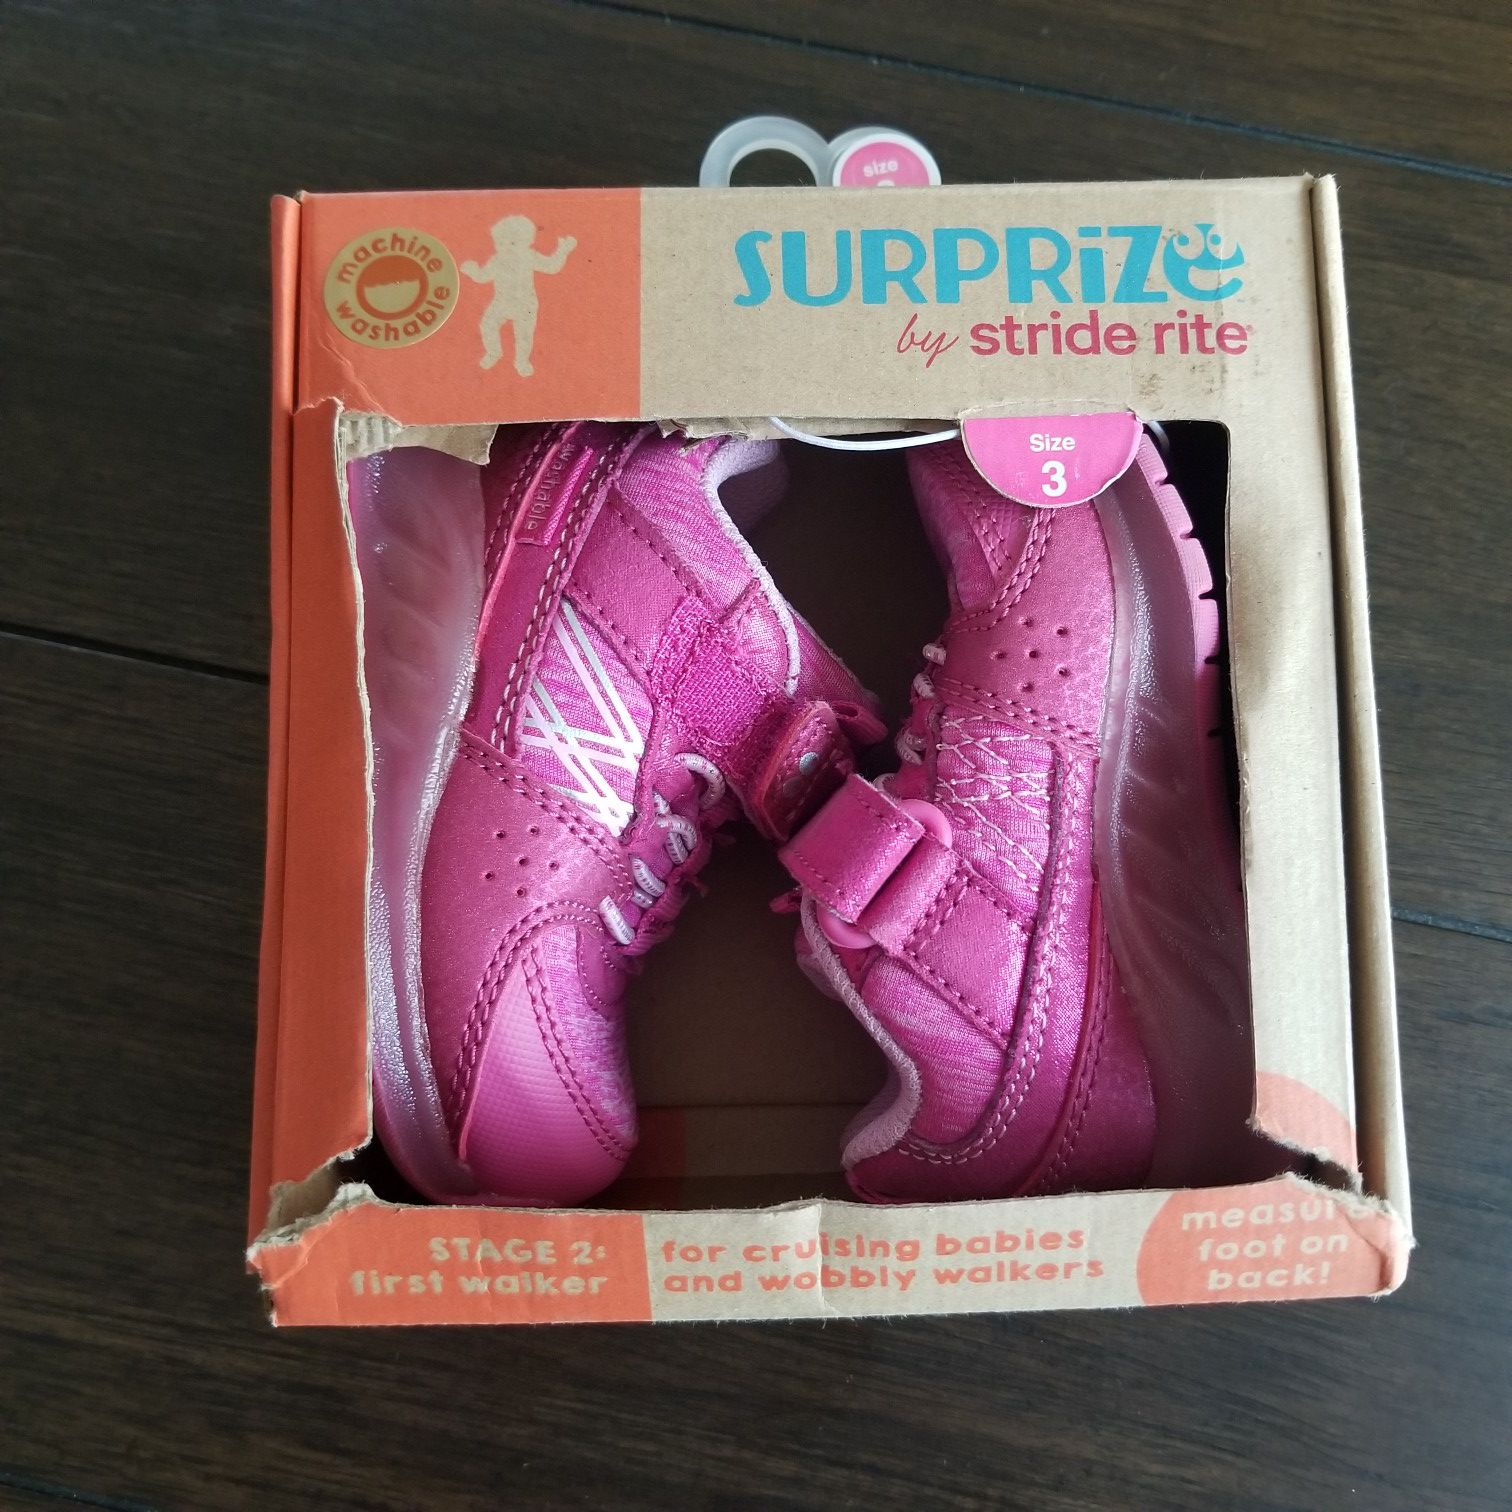 Surprize by Stride Rite Stage 2 first walker Babies shoes